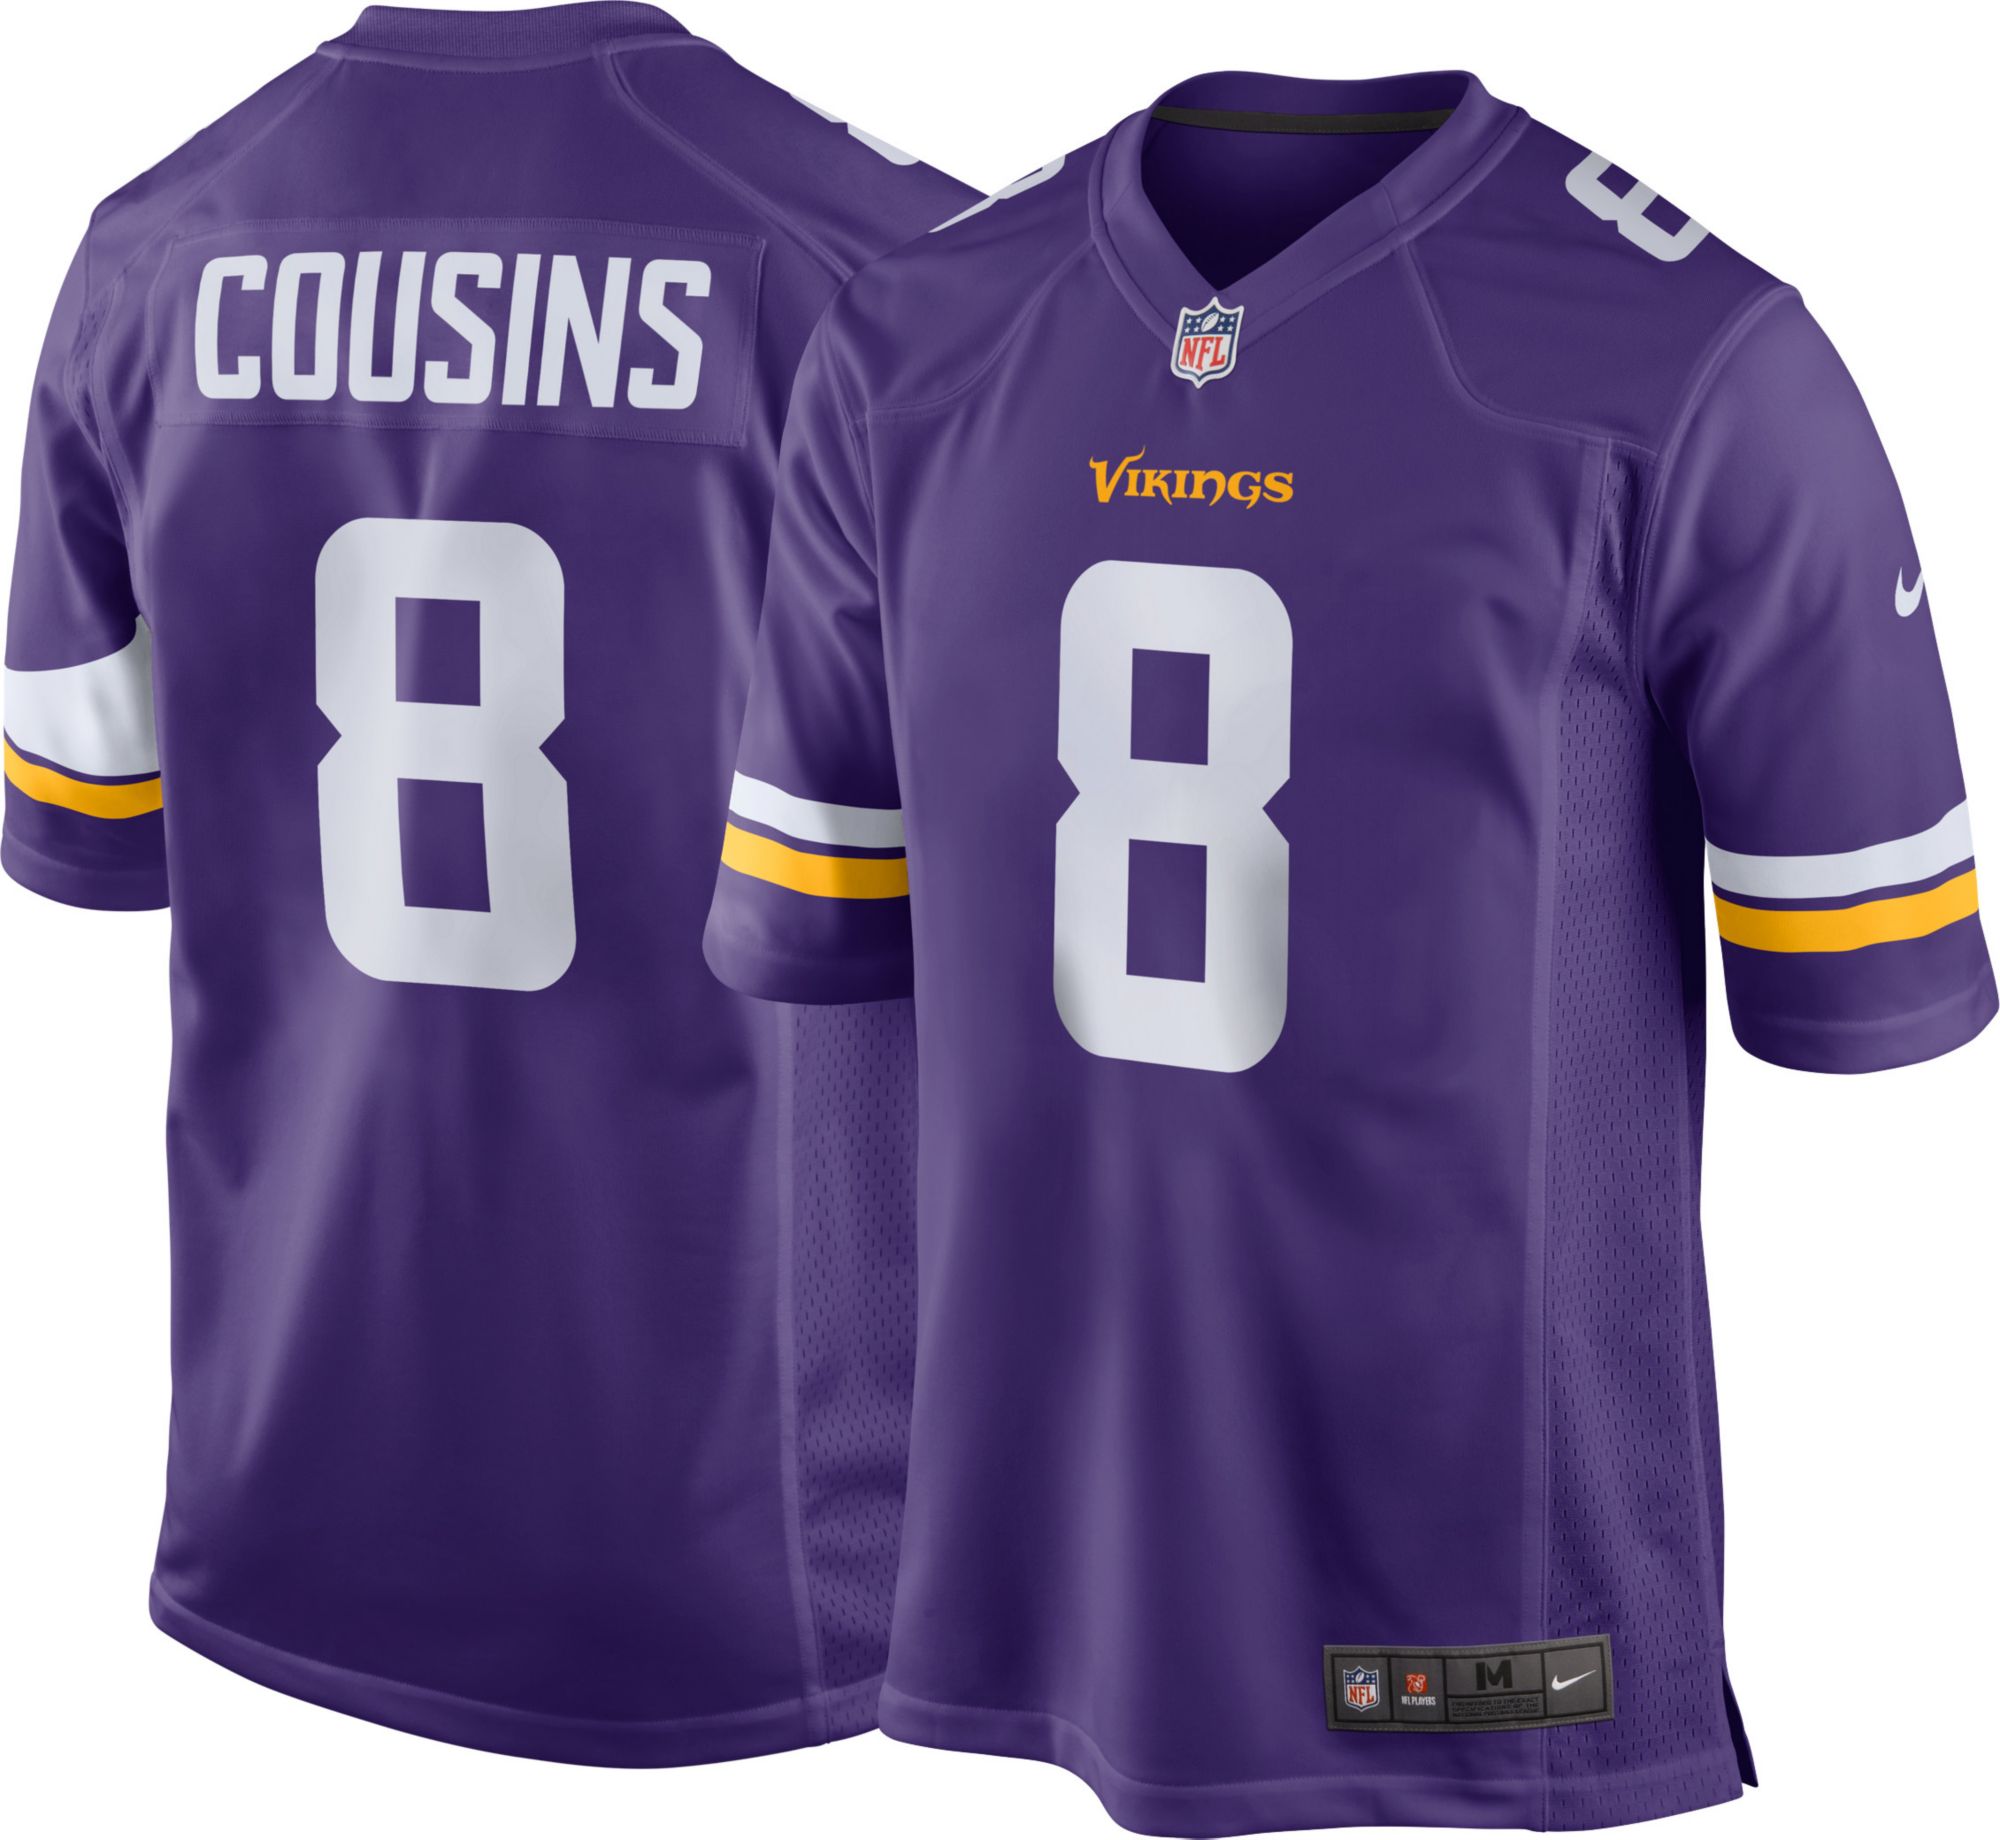 vikings home jersey color